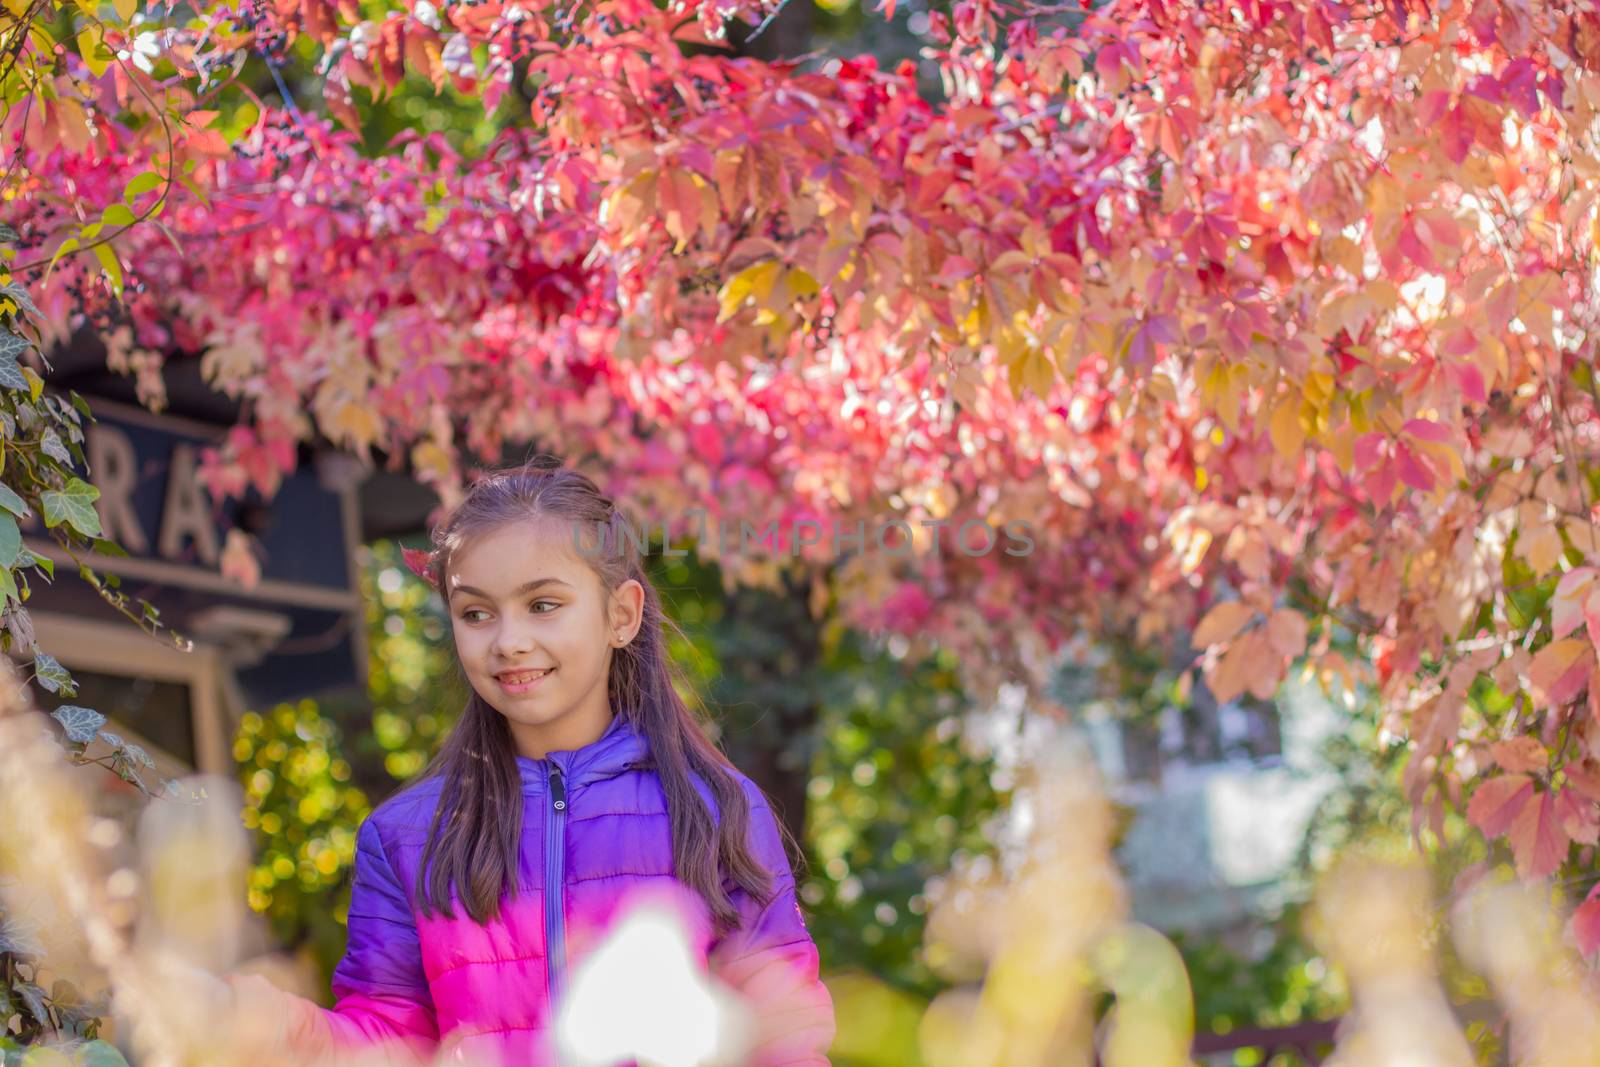 Smiling girl among red leaves in autumn